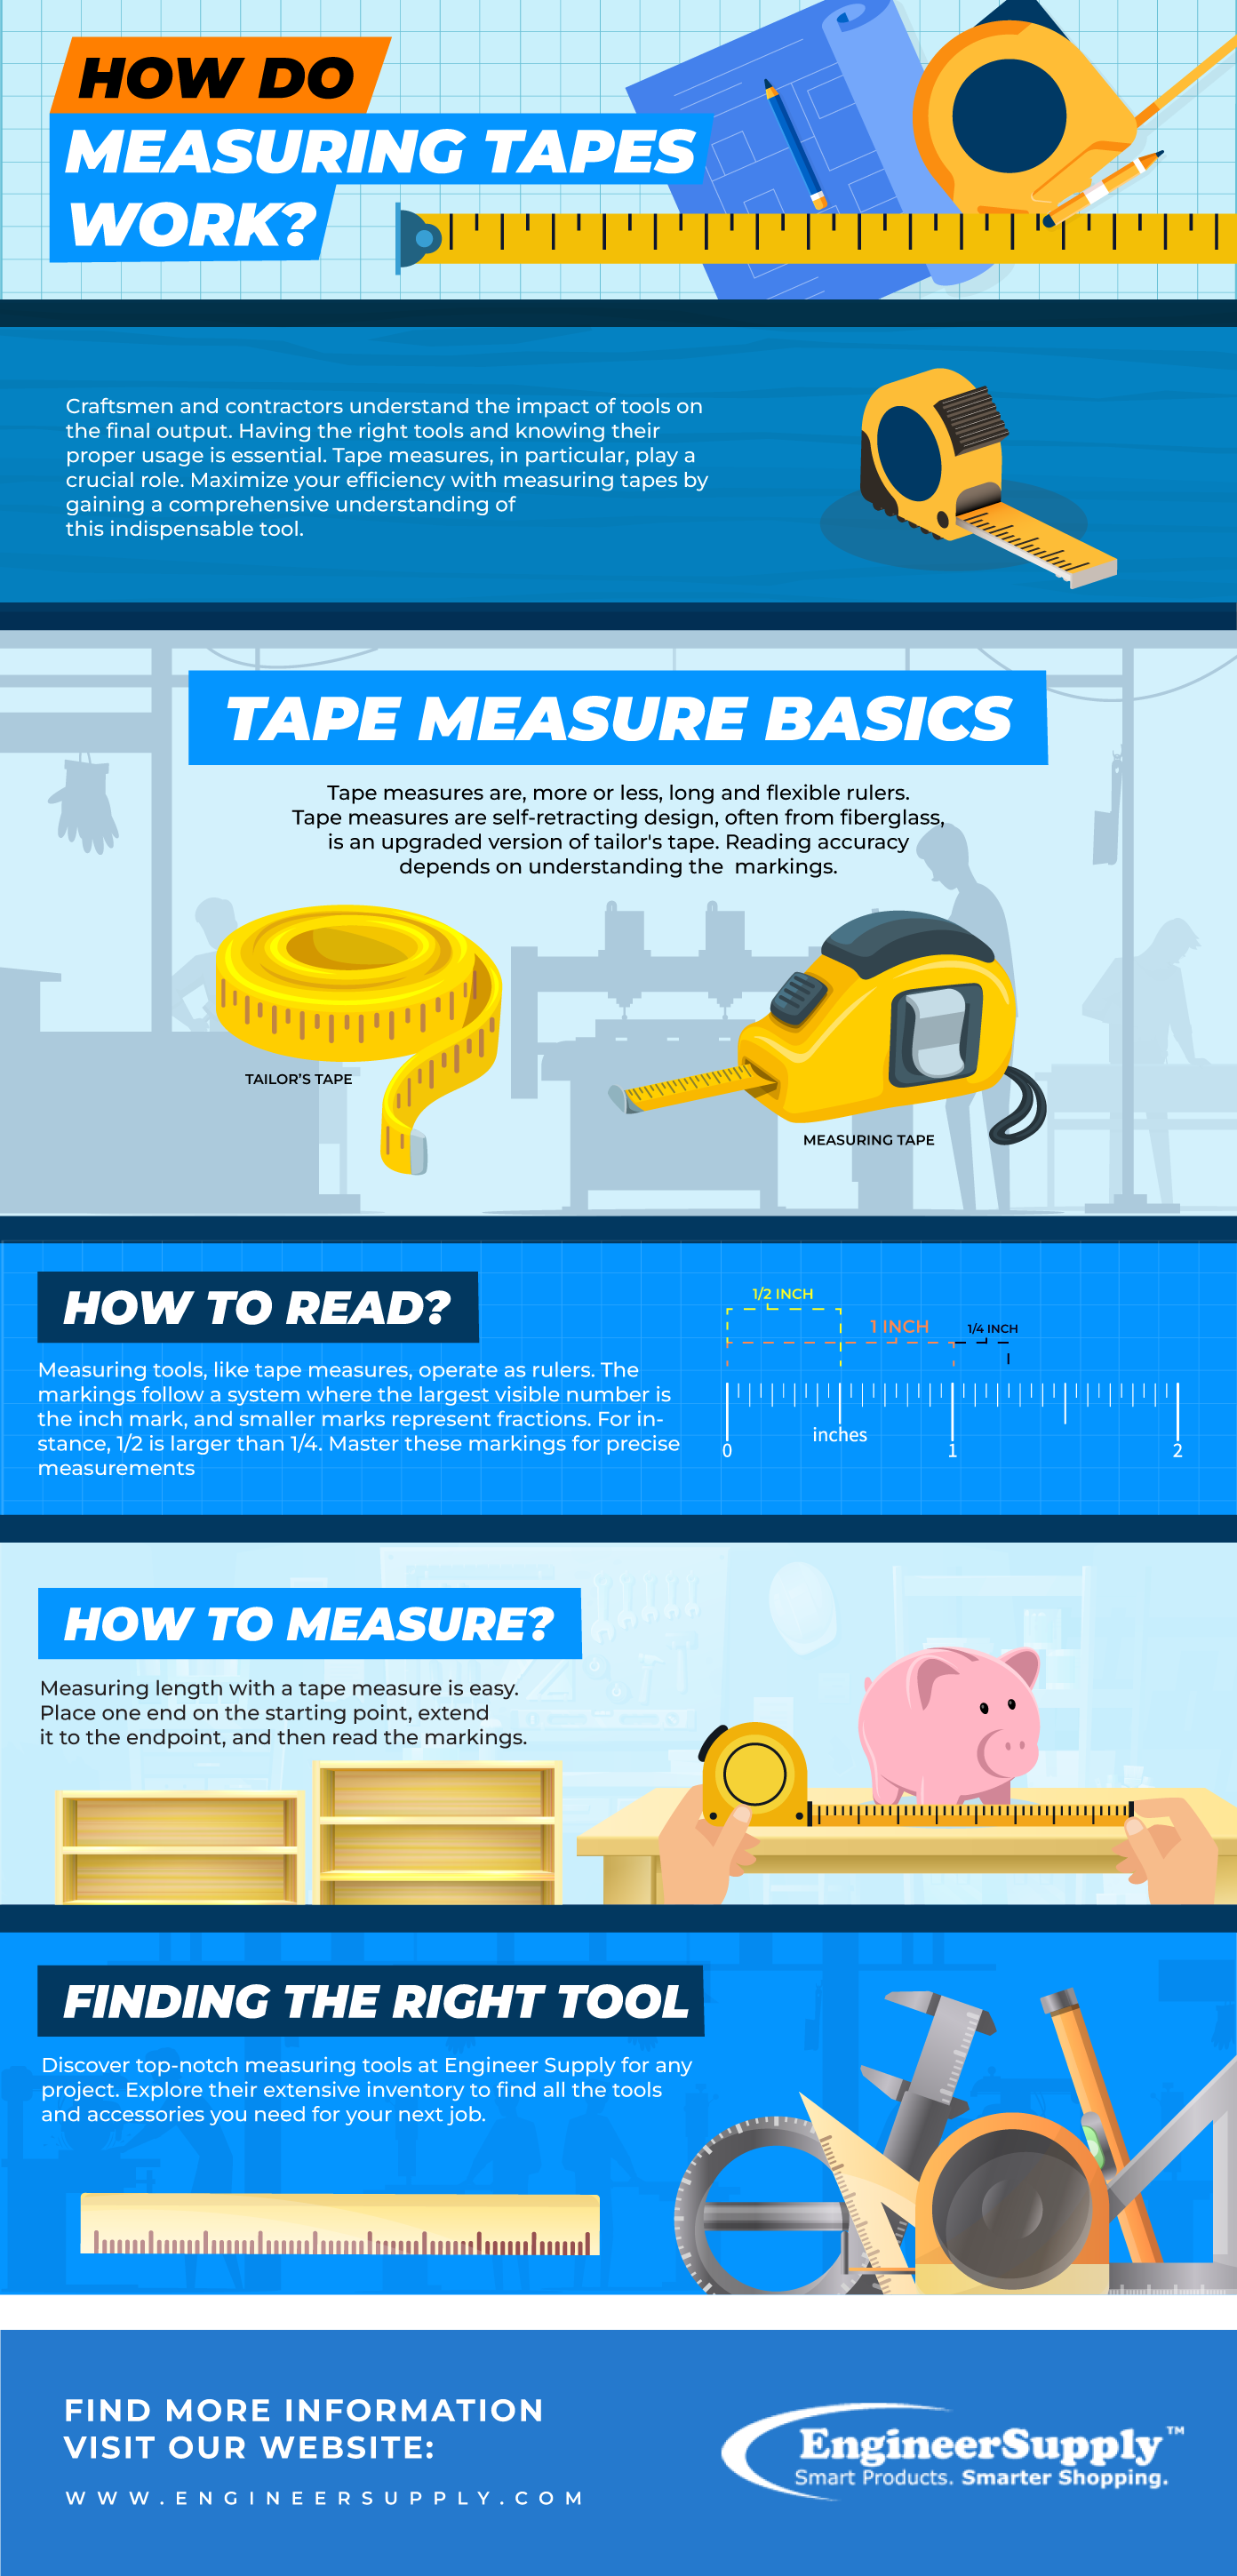 how do measuring tapes work infographic